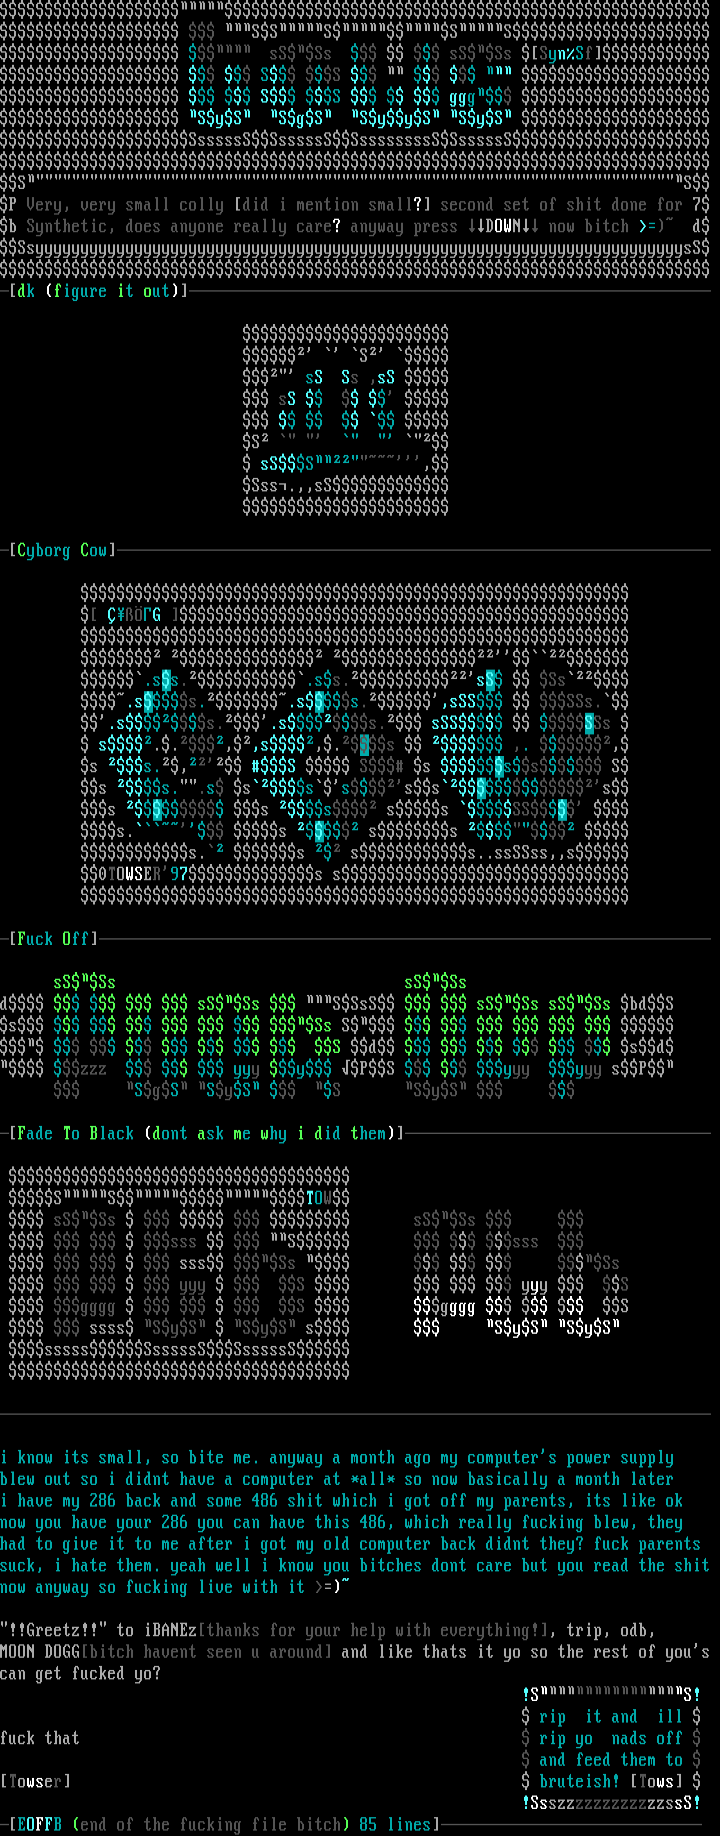 Tower's Ascii Colly by Towser